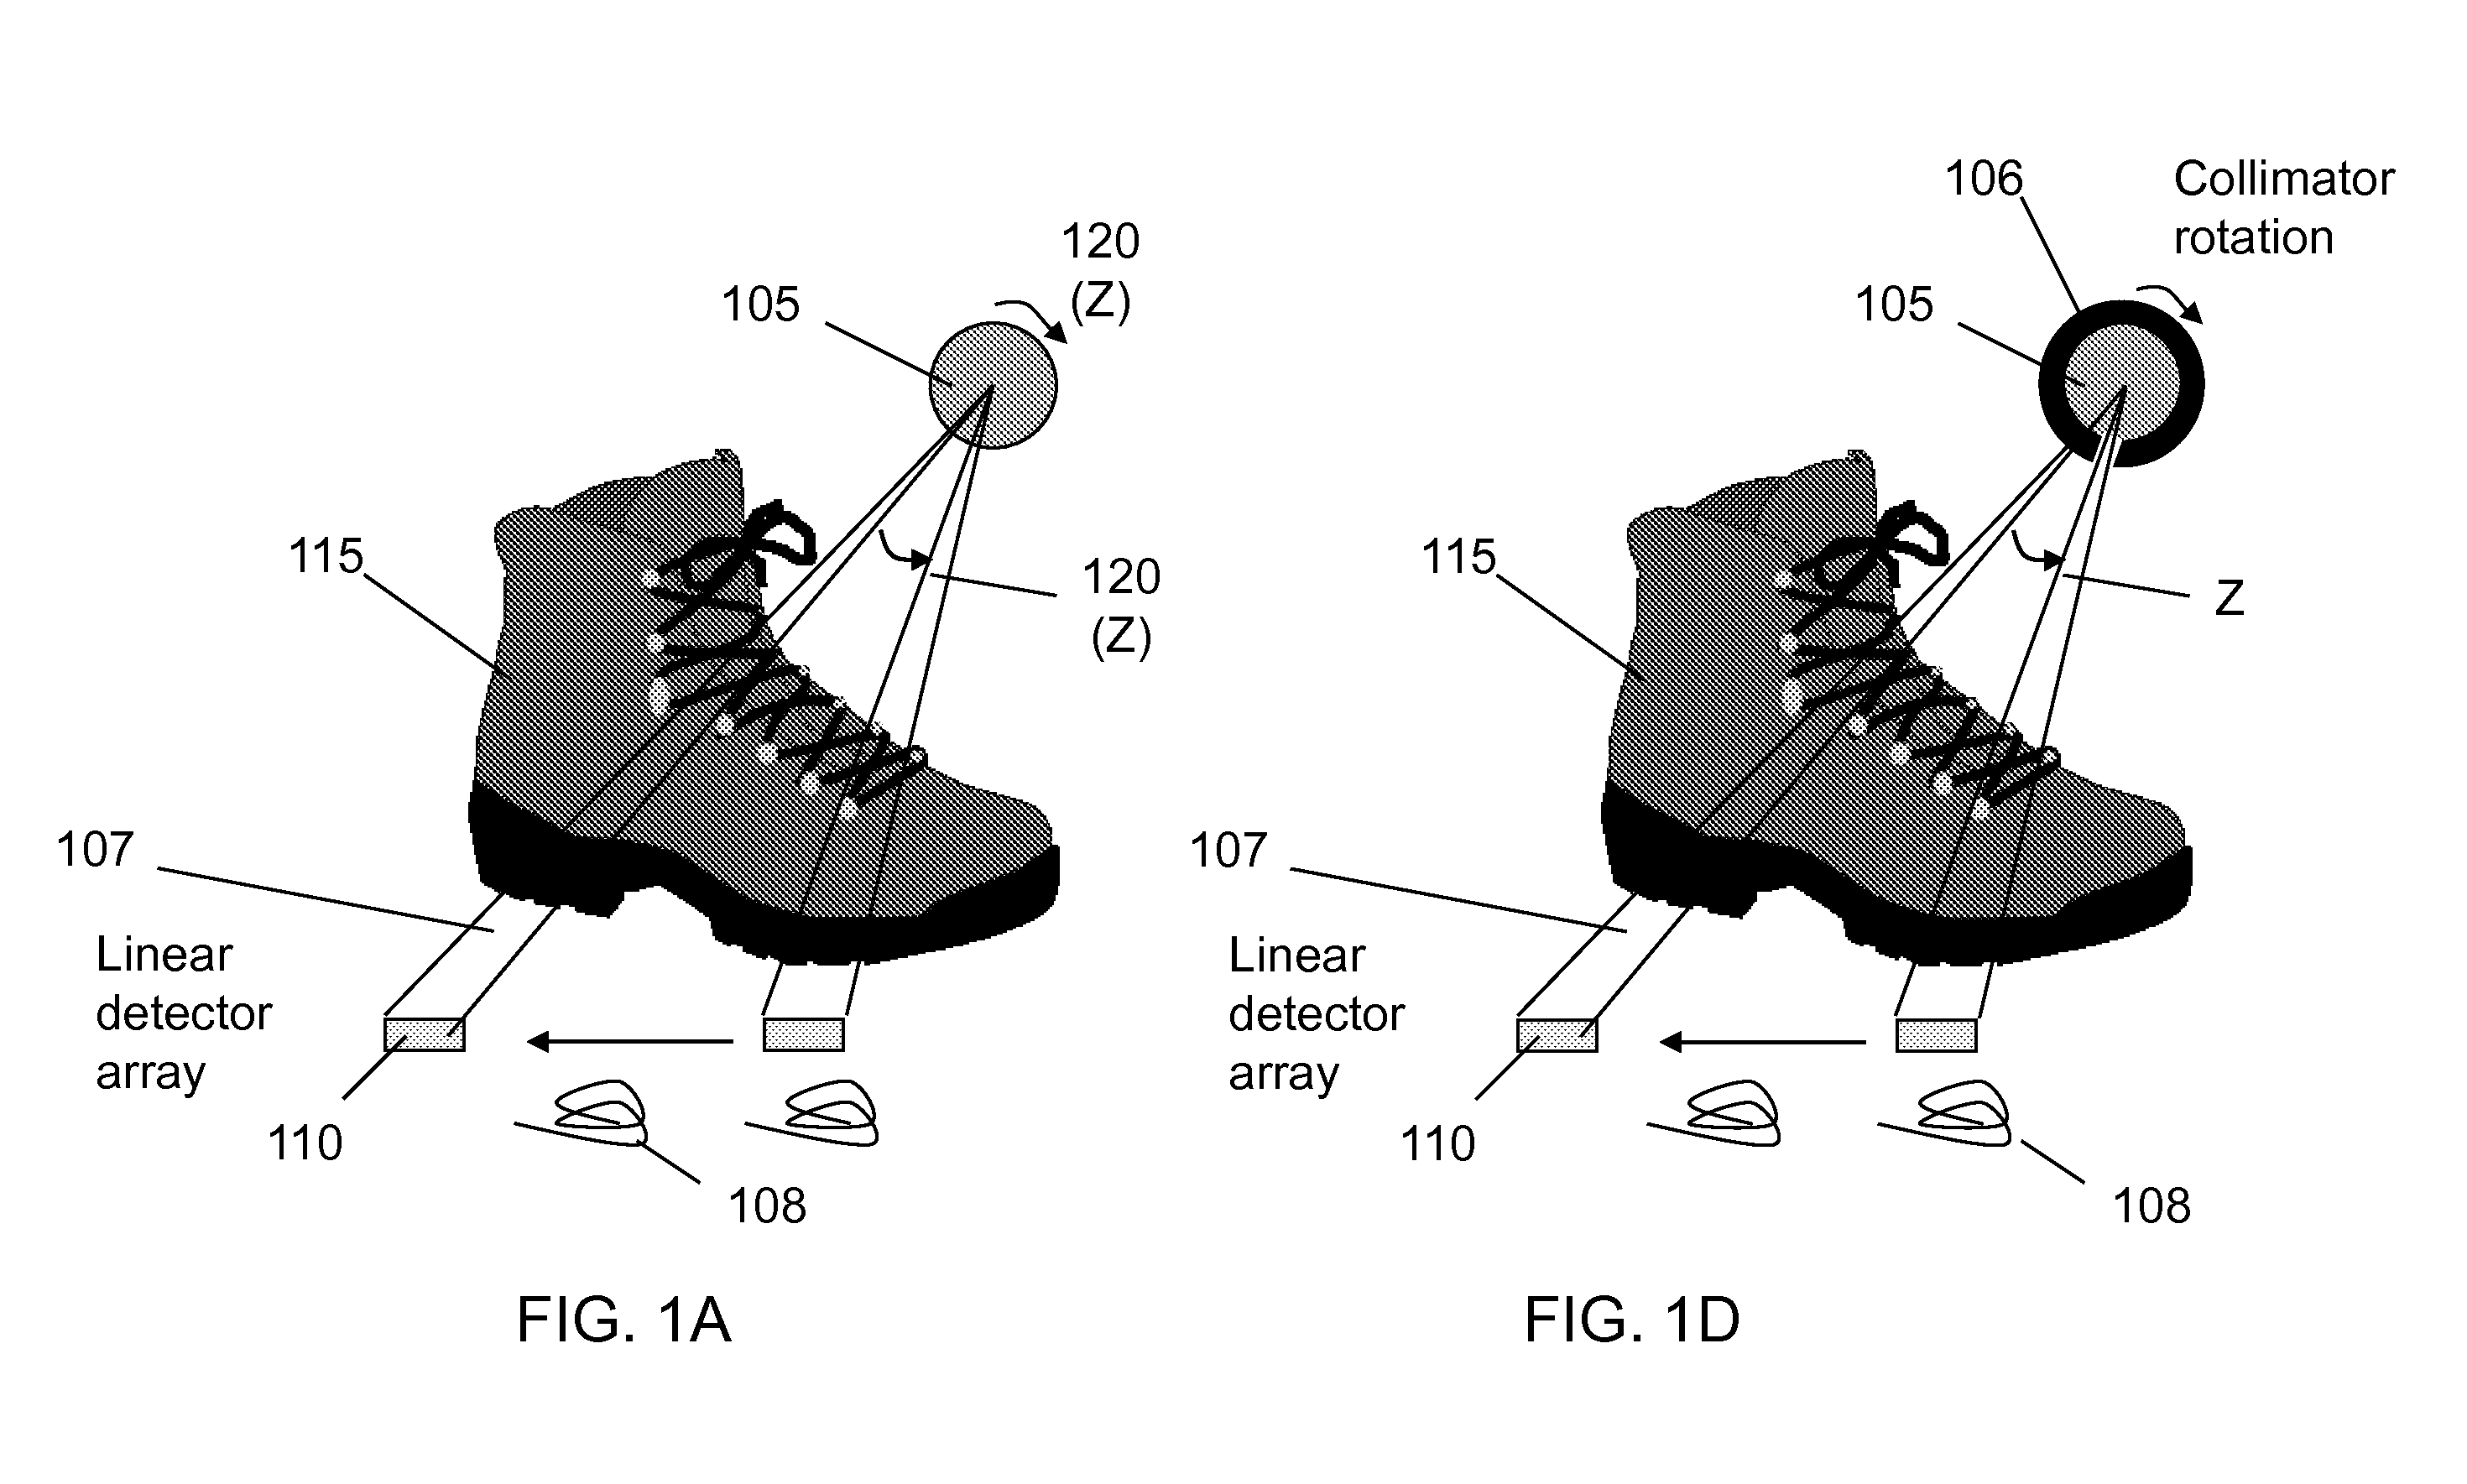 X-Ray-Based System and Methods for Inspecting a Person's Shoes for Aviation Security Threats